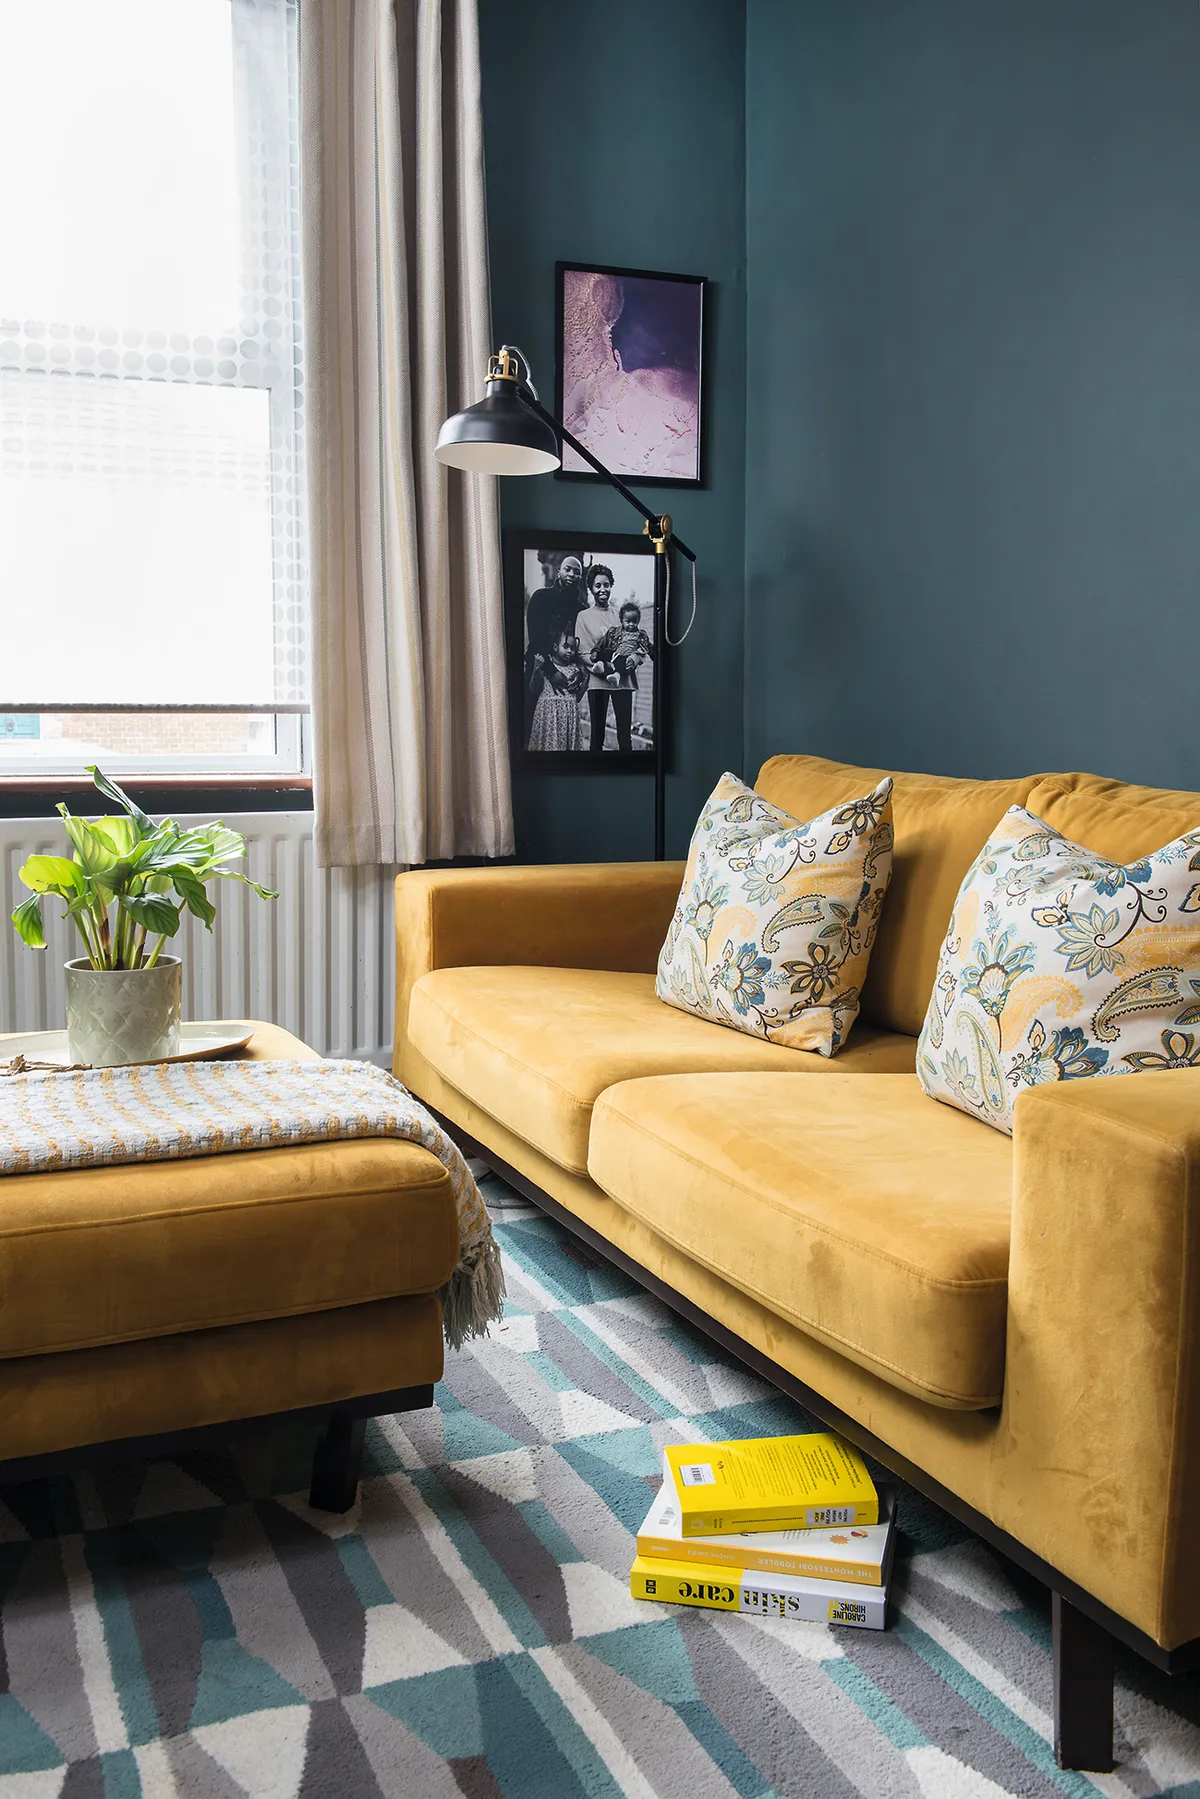 Luckily, Camellia already had the yellow velvet sofa and footstool, which provided just the colour boost her scheme needed. She’s also added a black lamp and framed prints for a chic accent